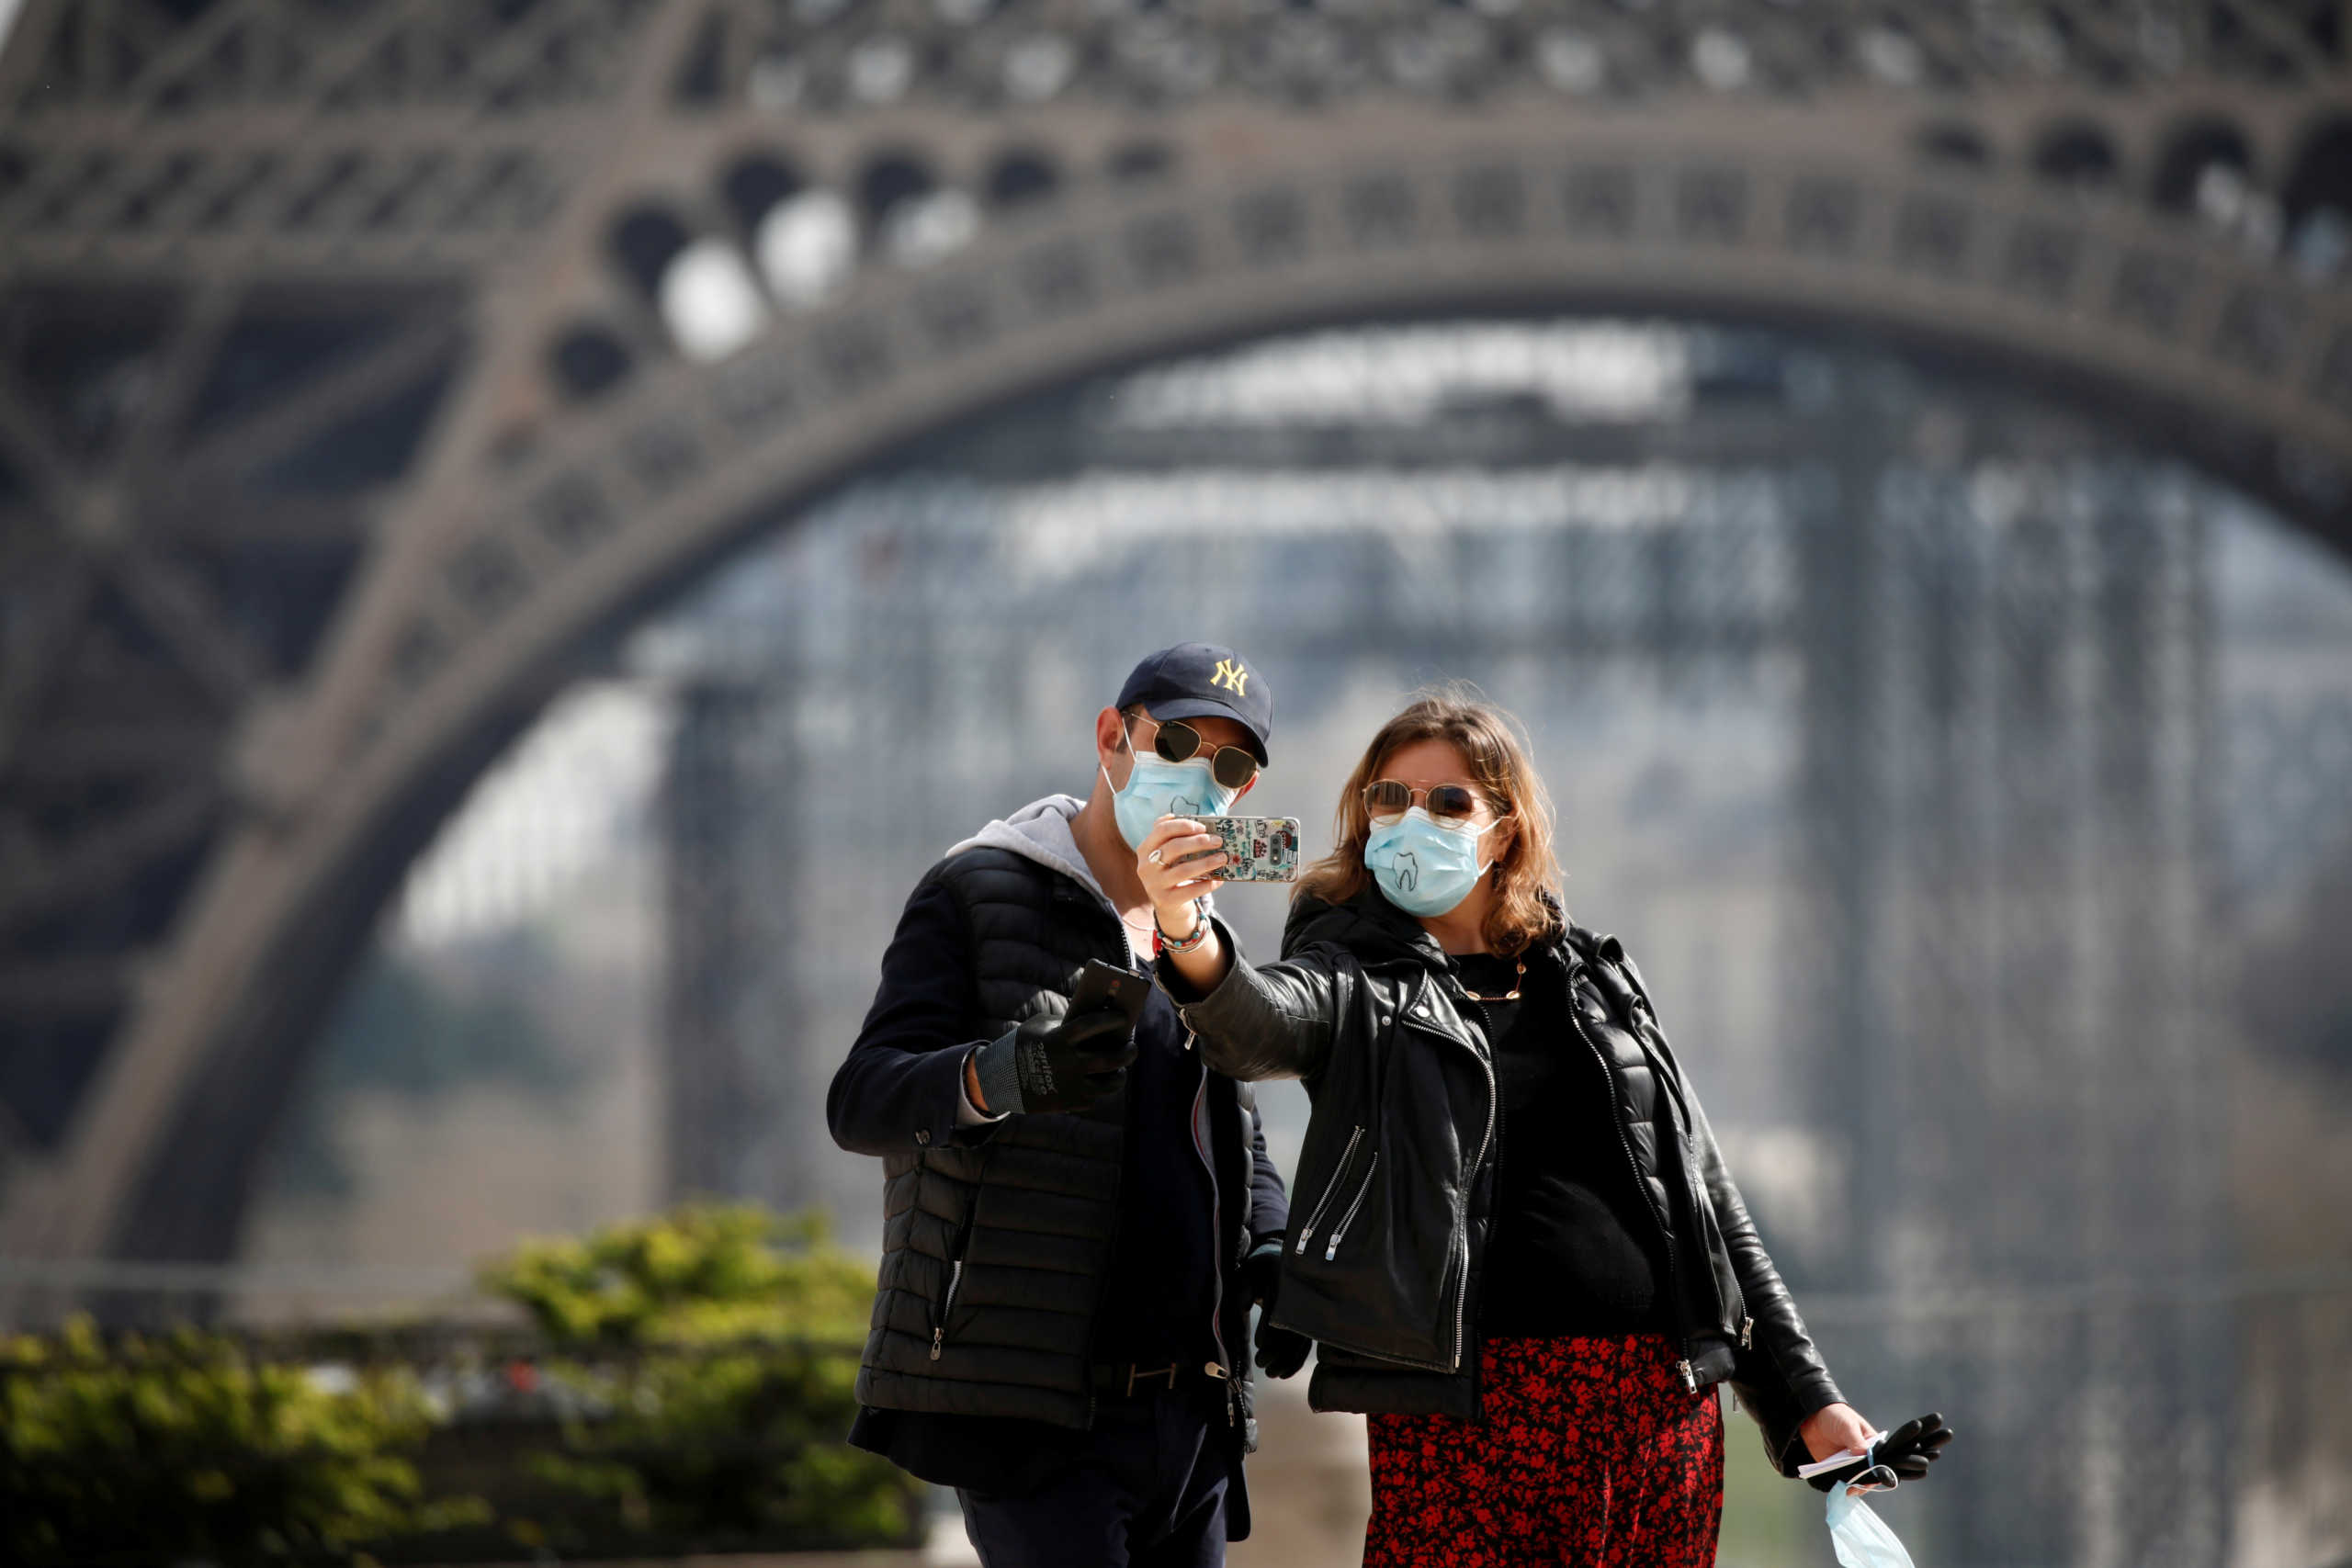 FILE PHOTO: A couple wearing protective masks take a selfie in front of the Eiffel Tower as lockdown is imposed to slow the spreading of the coronavirus disease (COVID-19) in Paris, France, March 18, 2020. REUTERS/Benoit Tessier/File Photo